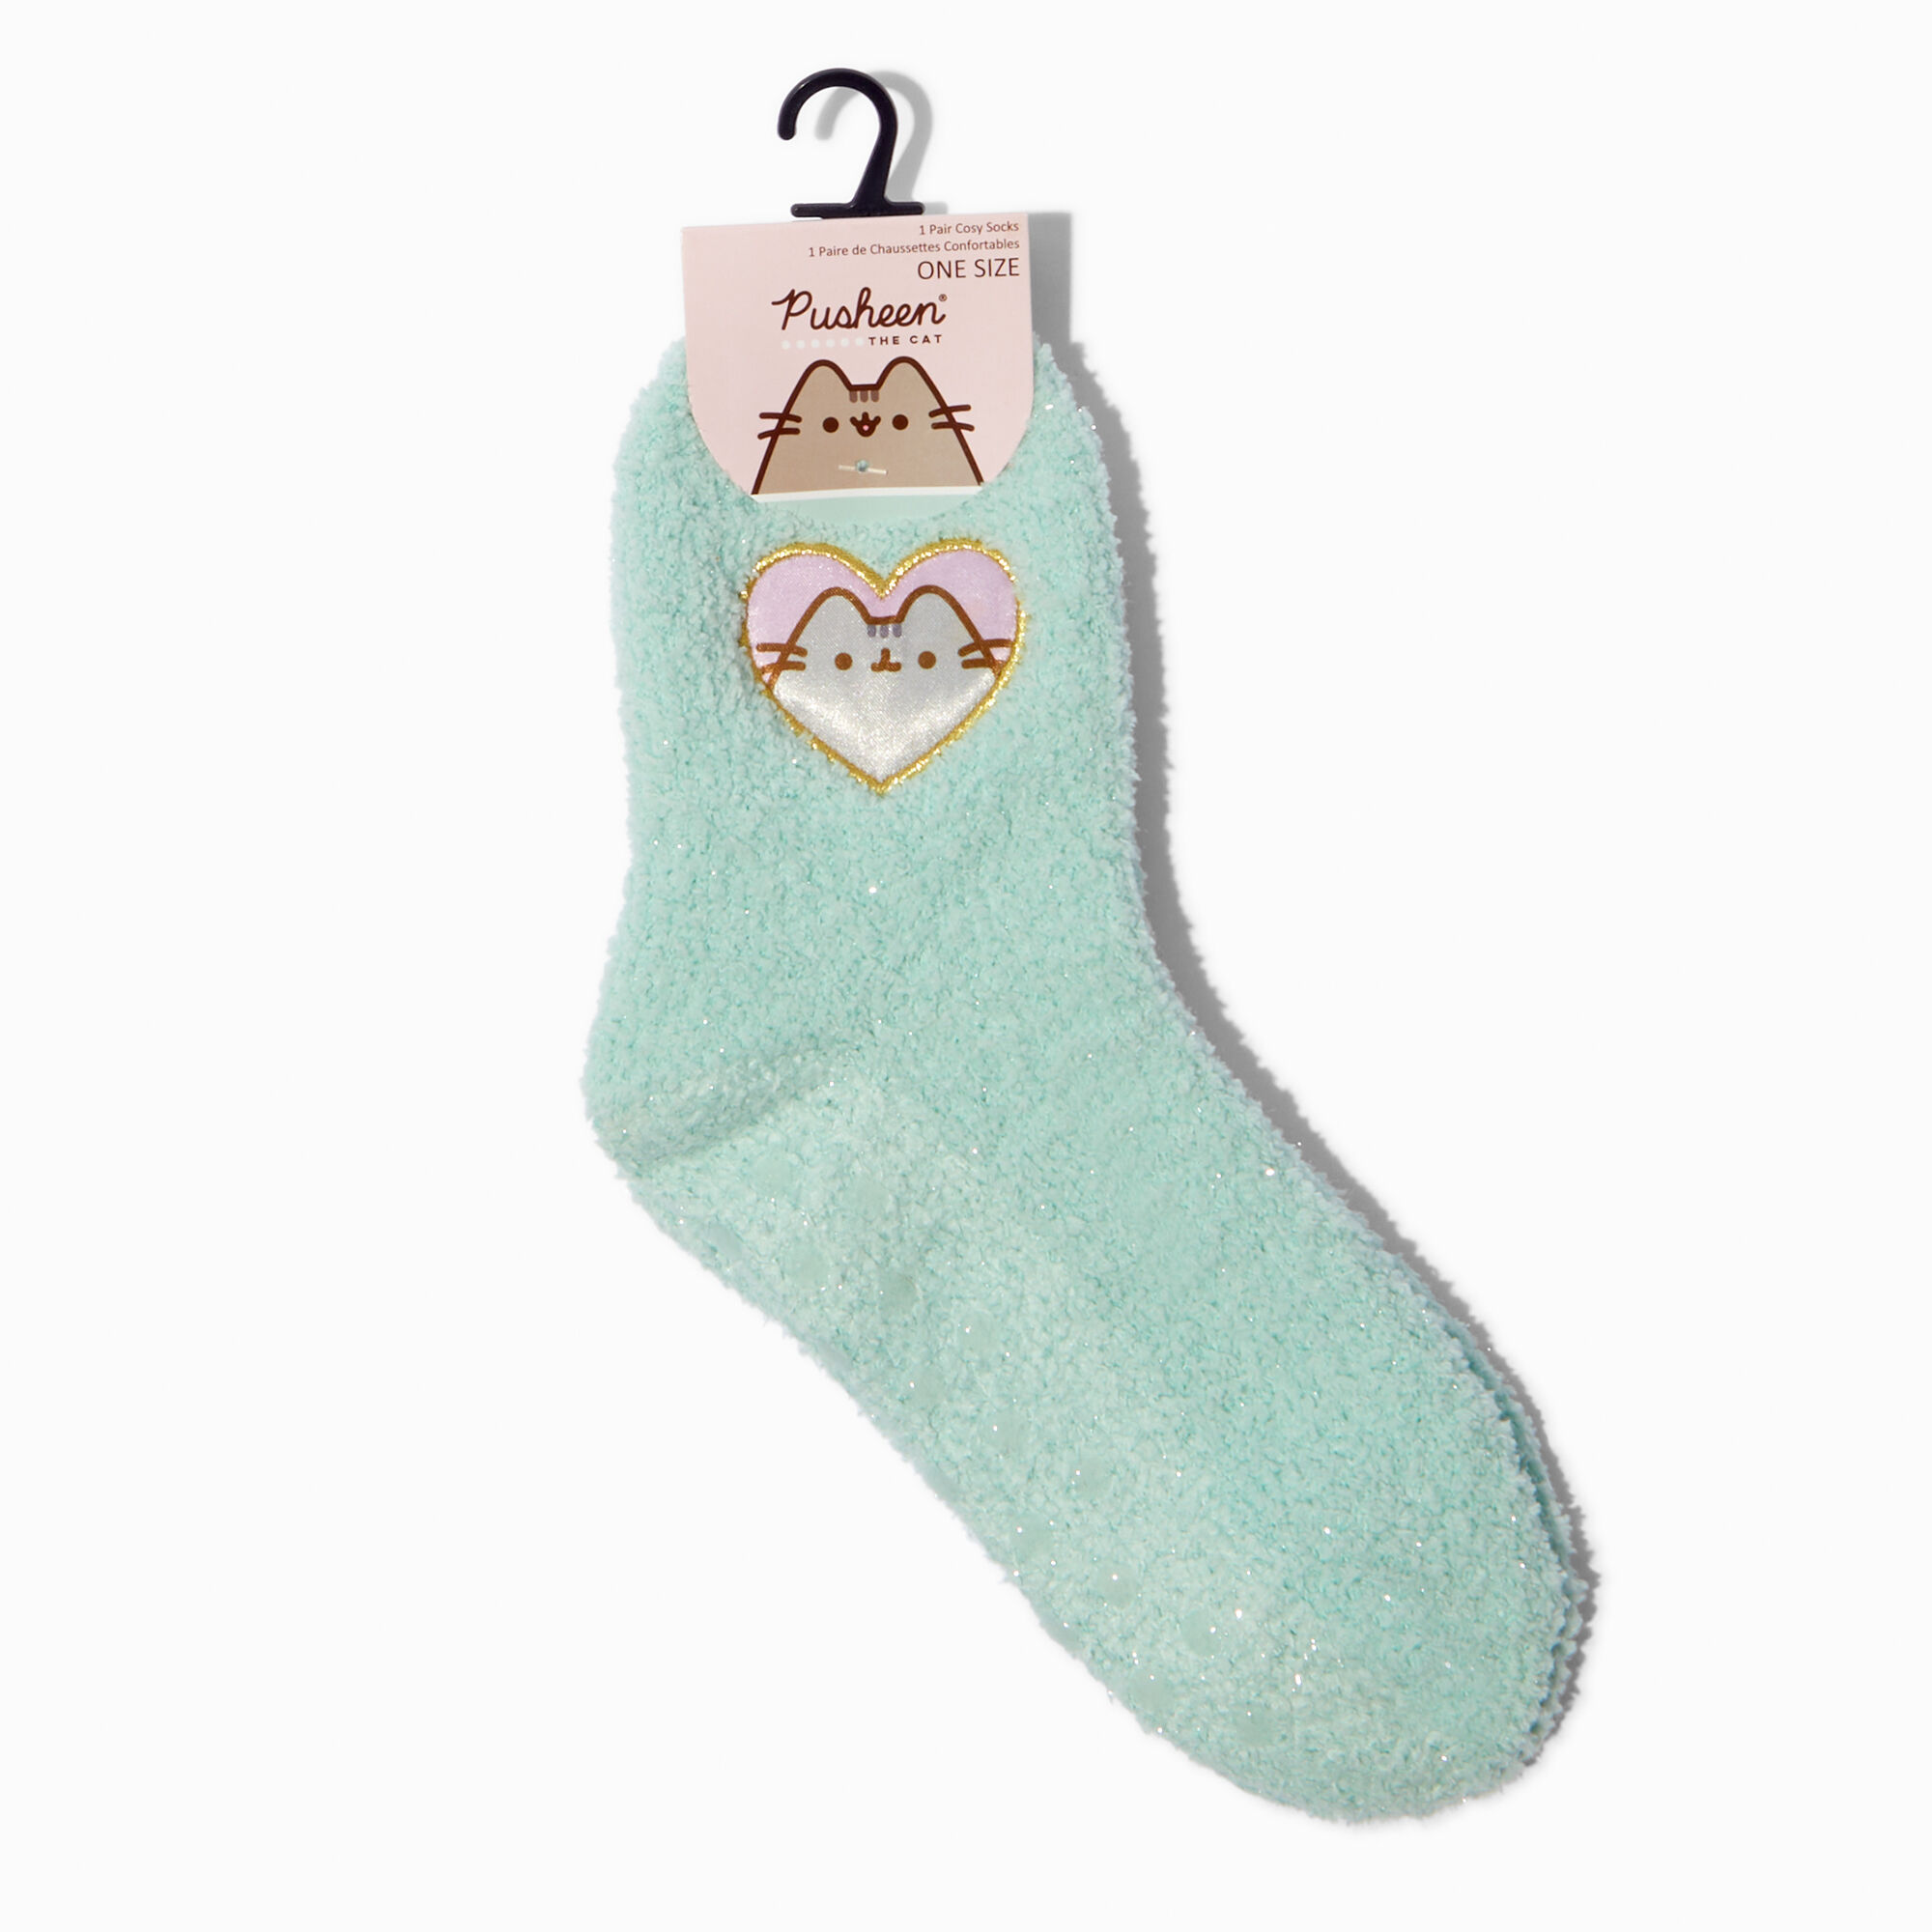 View Claires Pusheen Cozy Socks 1 Pair information